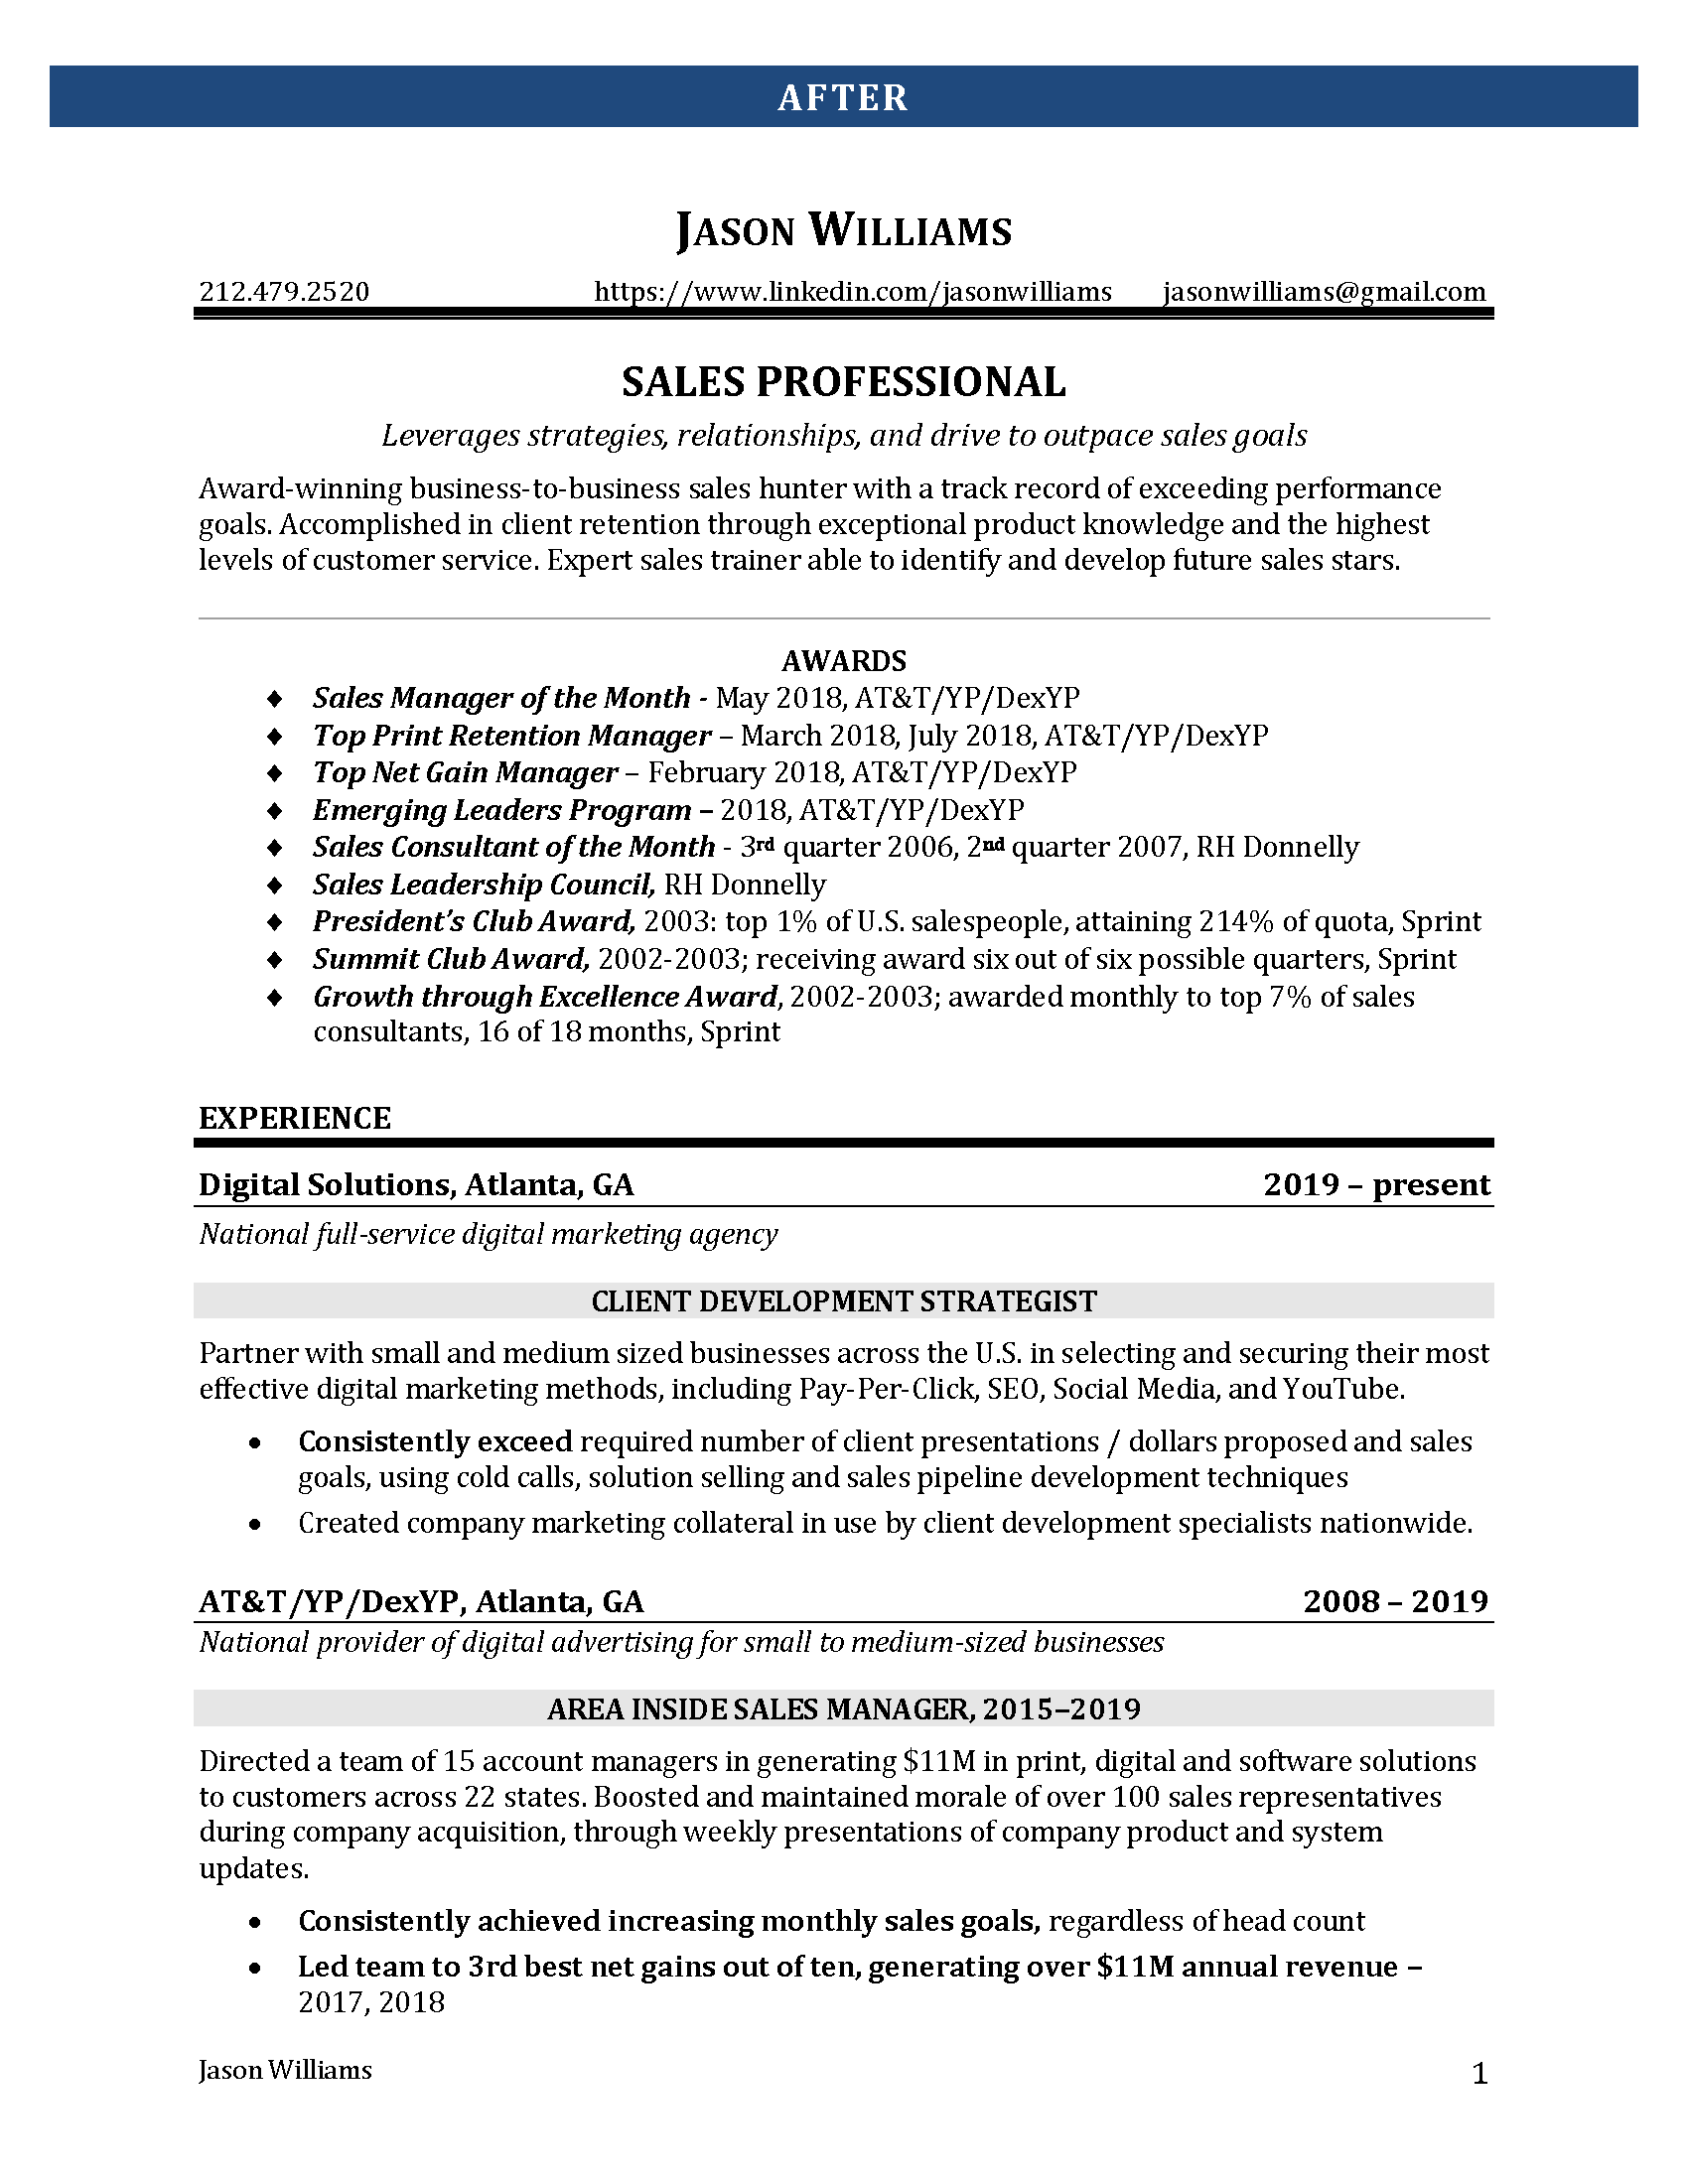 Jason Williams AFTER Resume Page 1